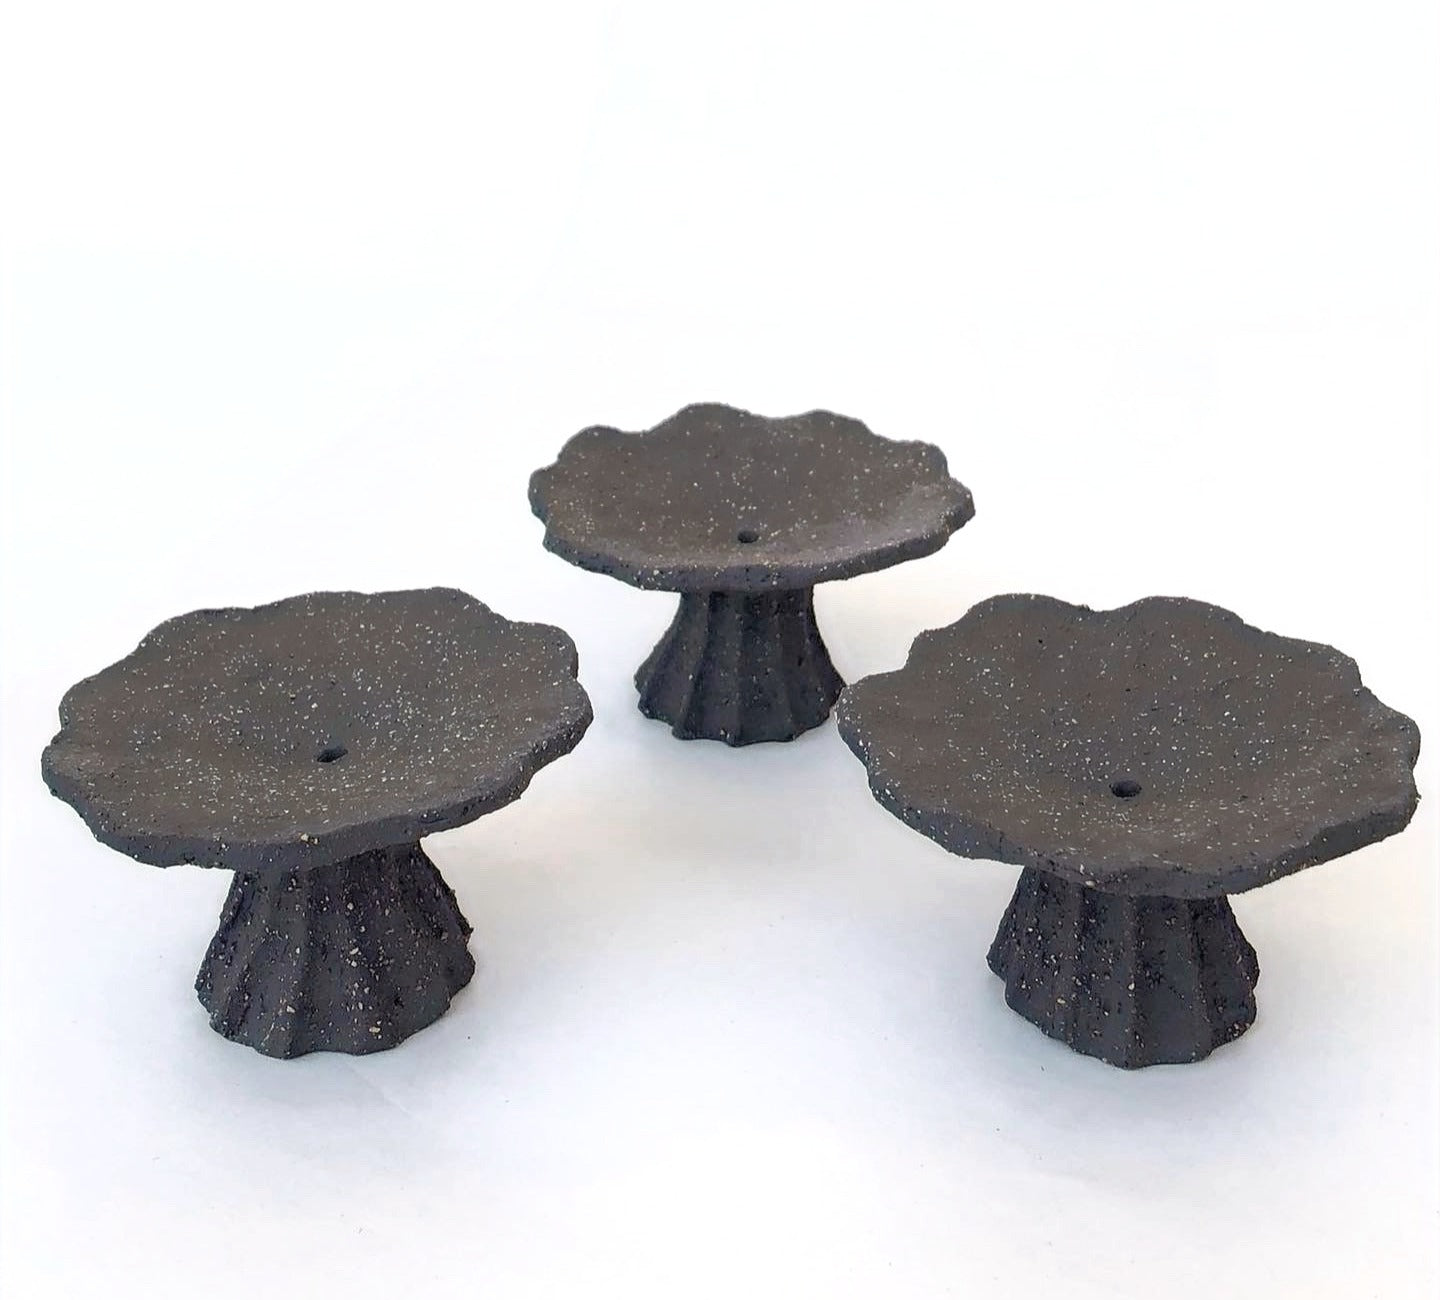 PPP LAB Incense Holder in Black Clay